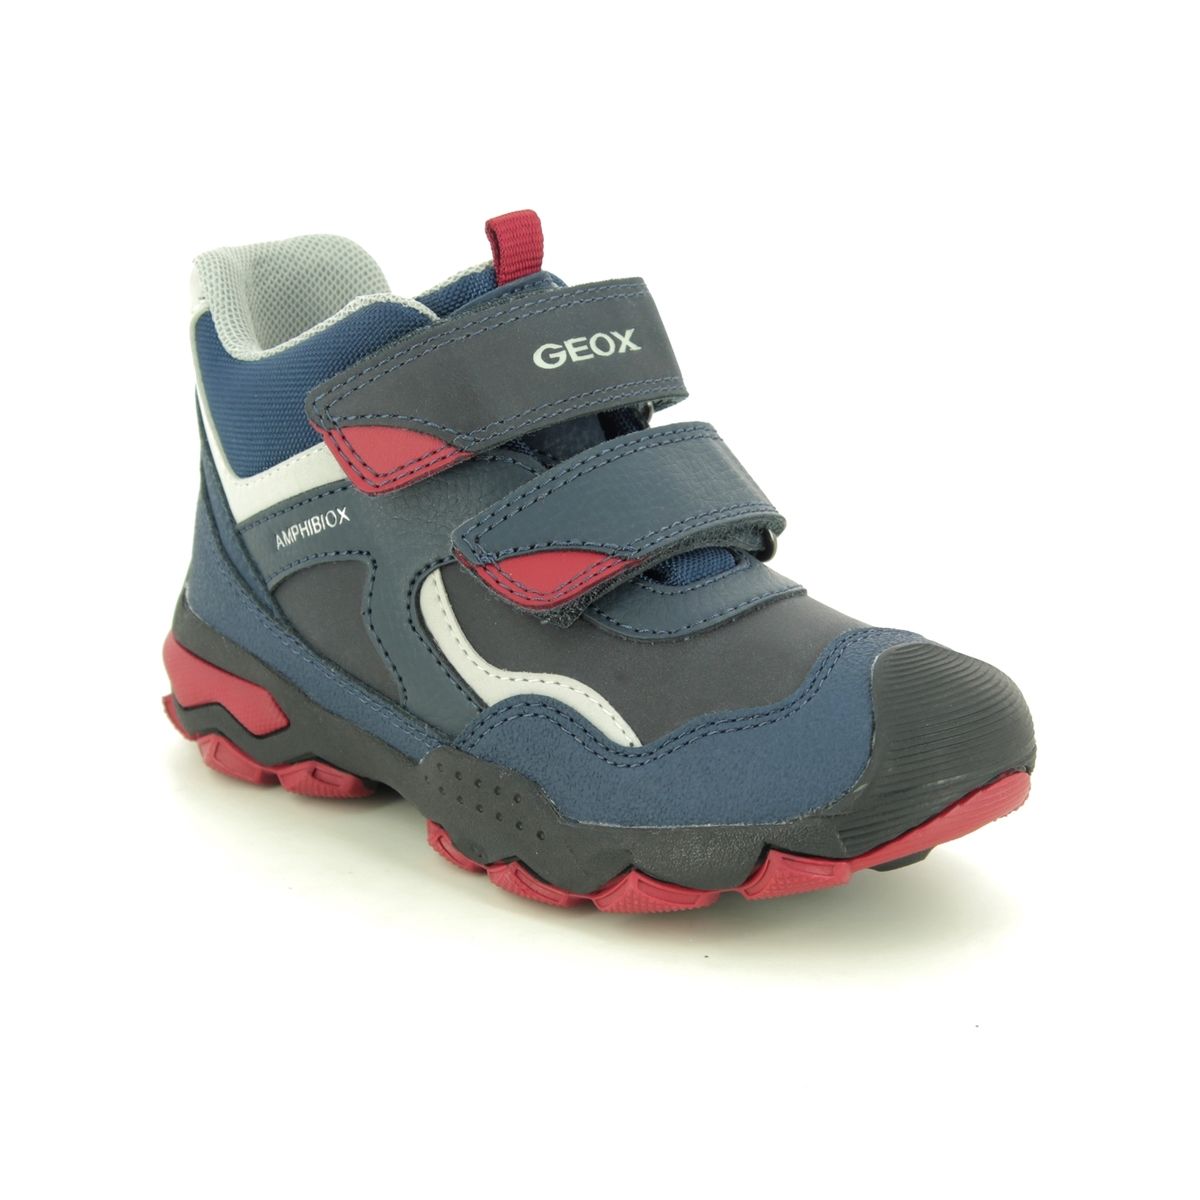 Geox Buller Boy Tex Navy Red Kids boys boots J049WB-C4244 in a Plain  in Size 26